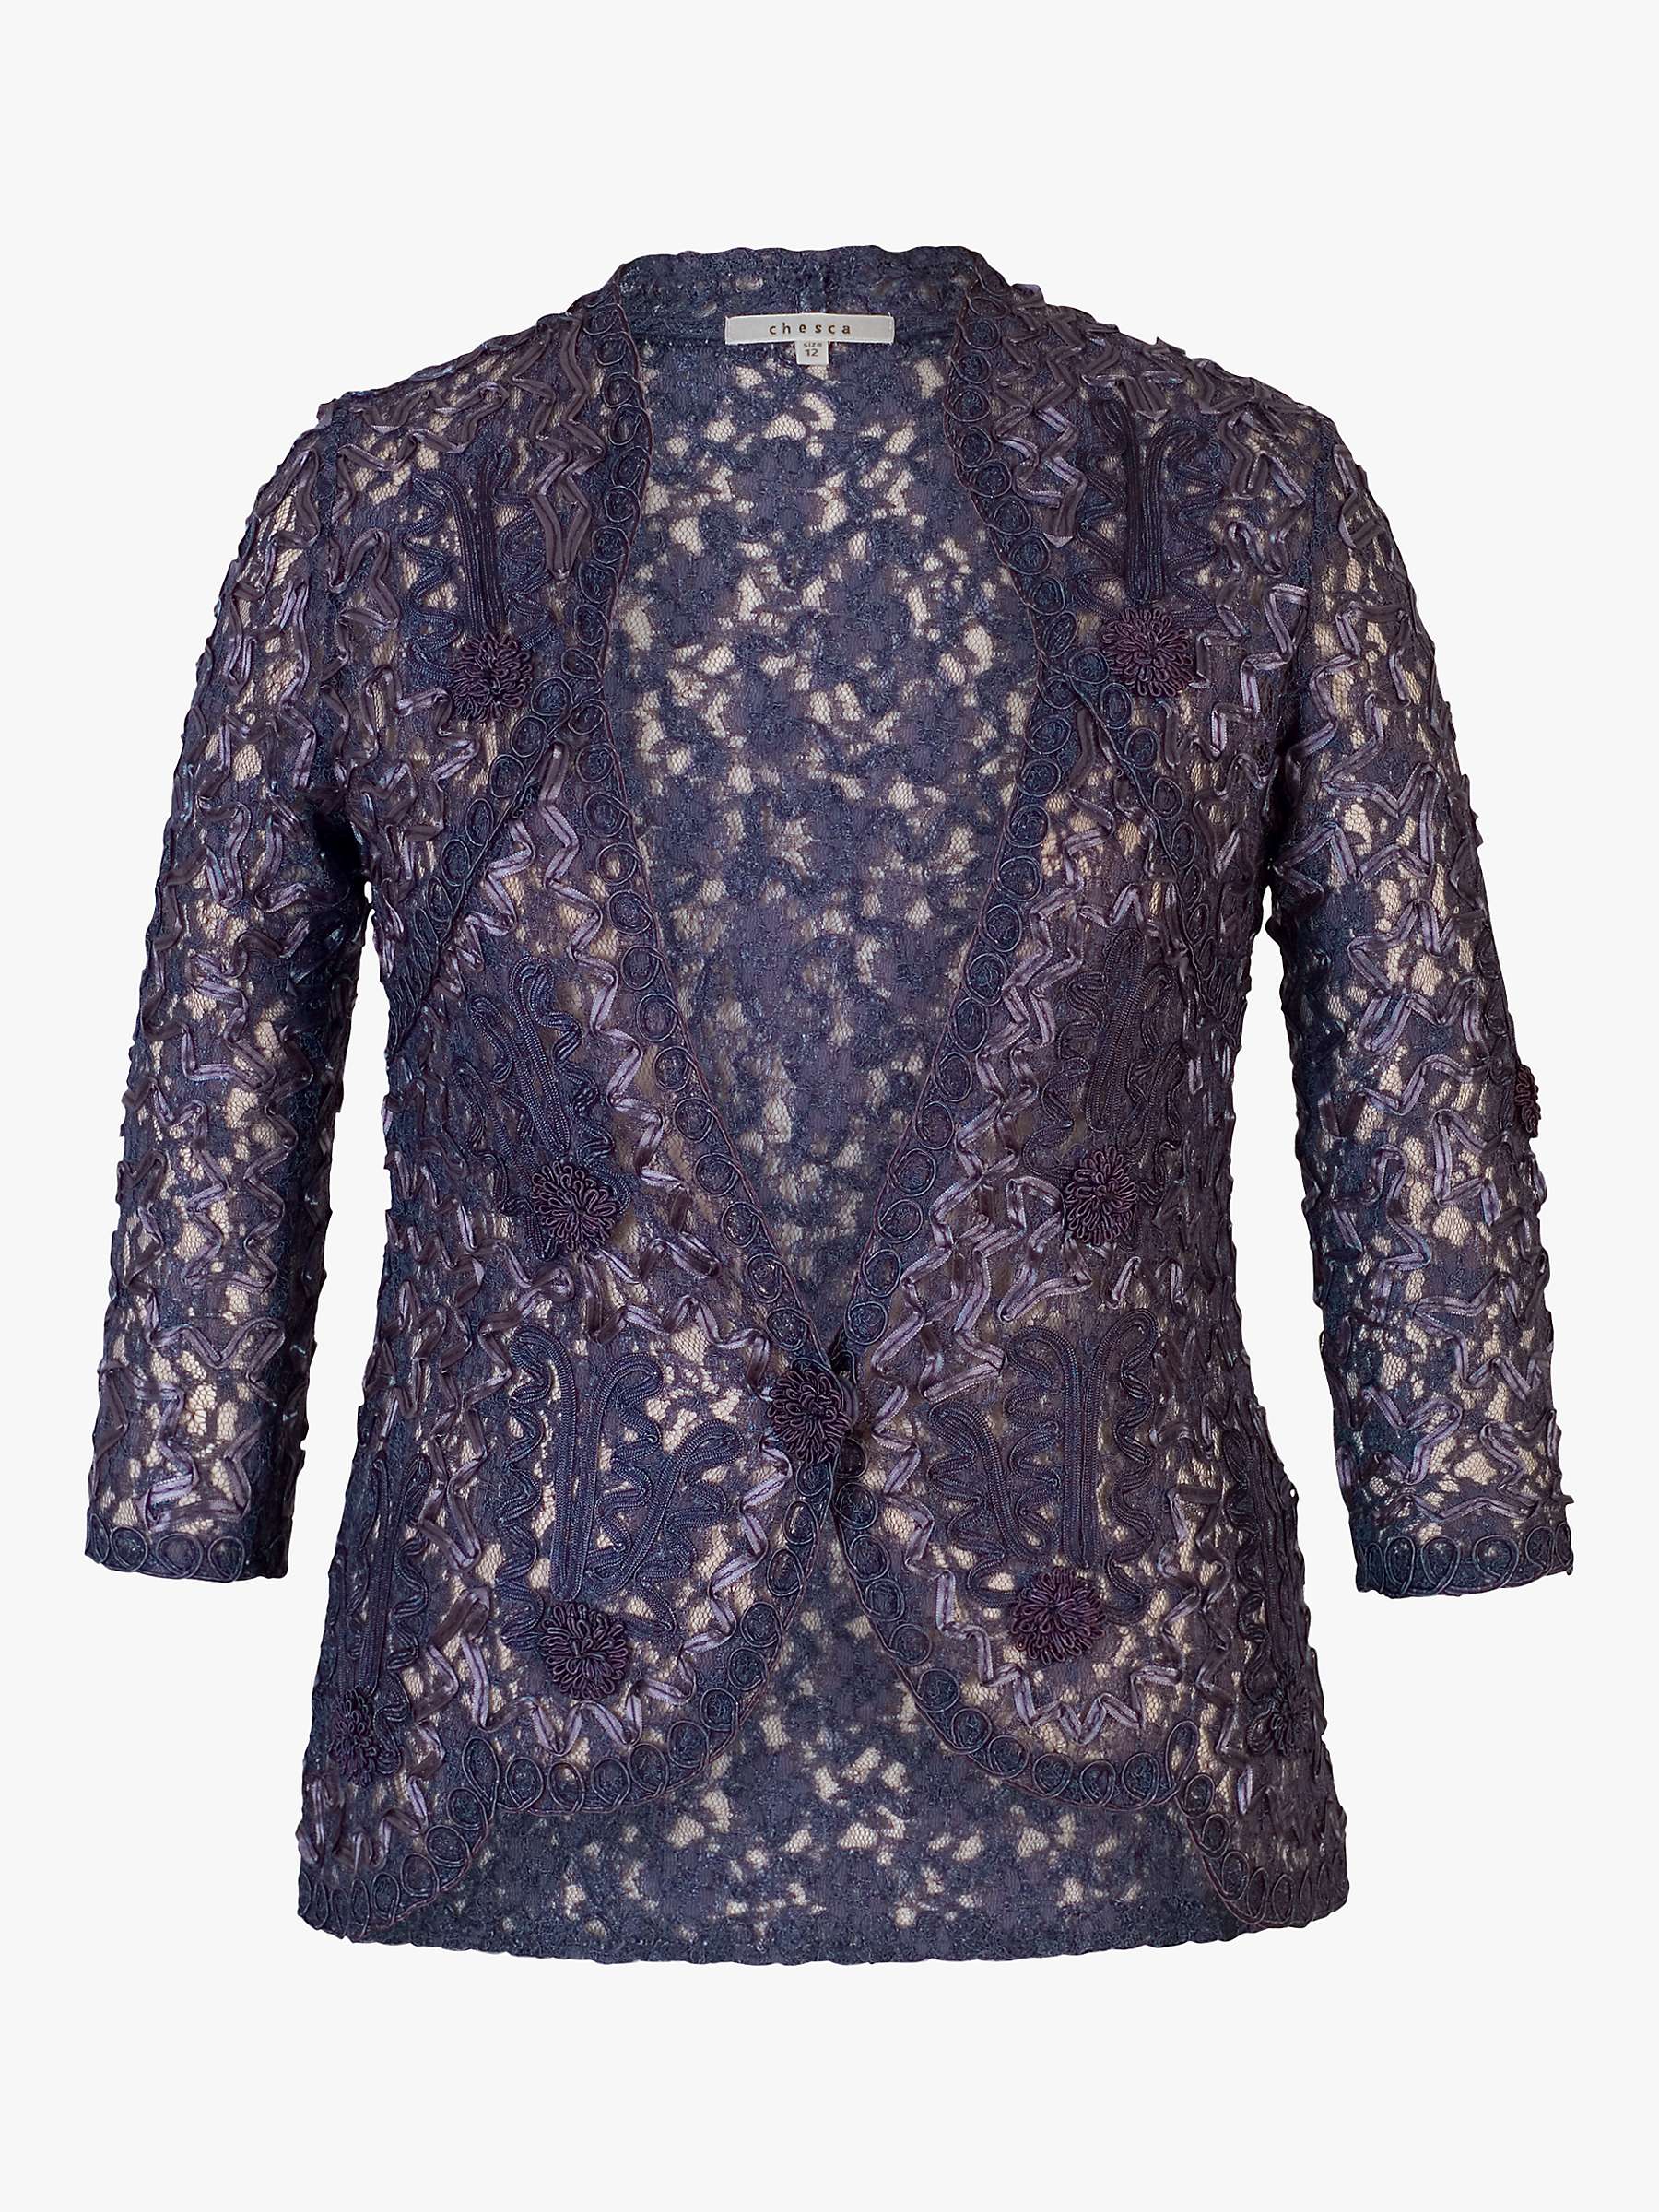 Buy Chesca Lace Cornelli Embroidered Trim Jacket Online at johnlewis.com